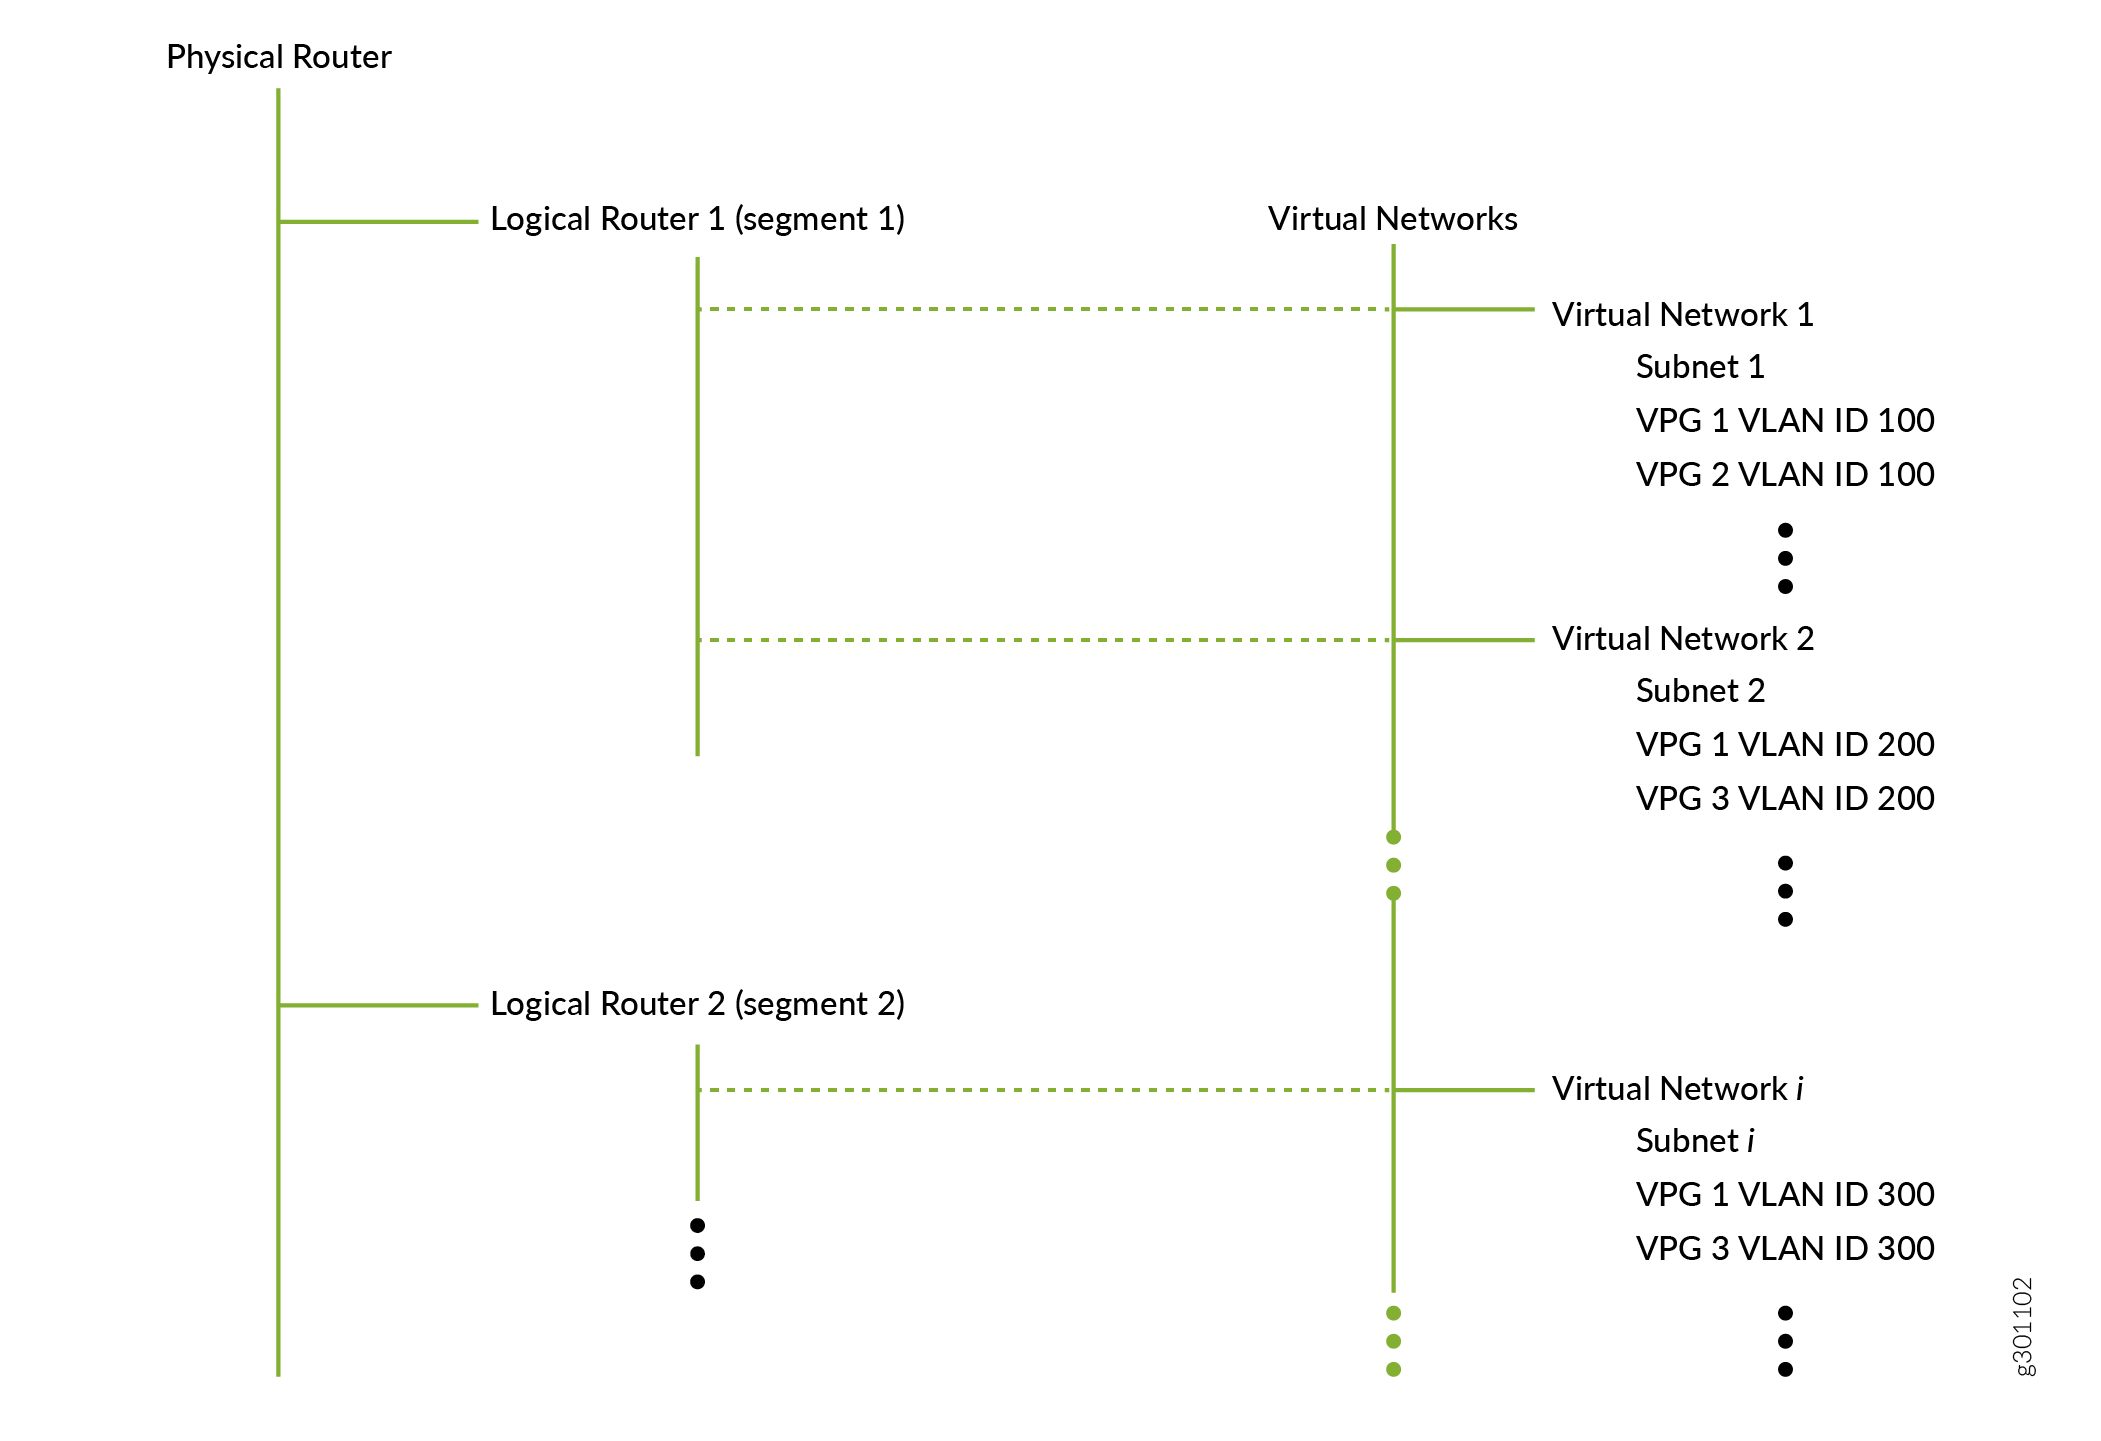 Logical Routers and Virtual Networks in a Single-Tenant Network